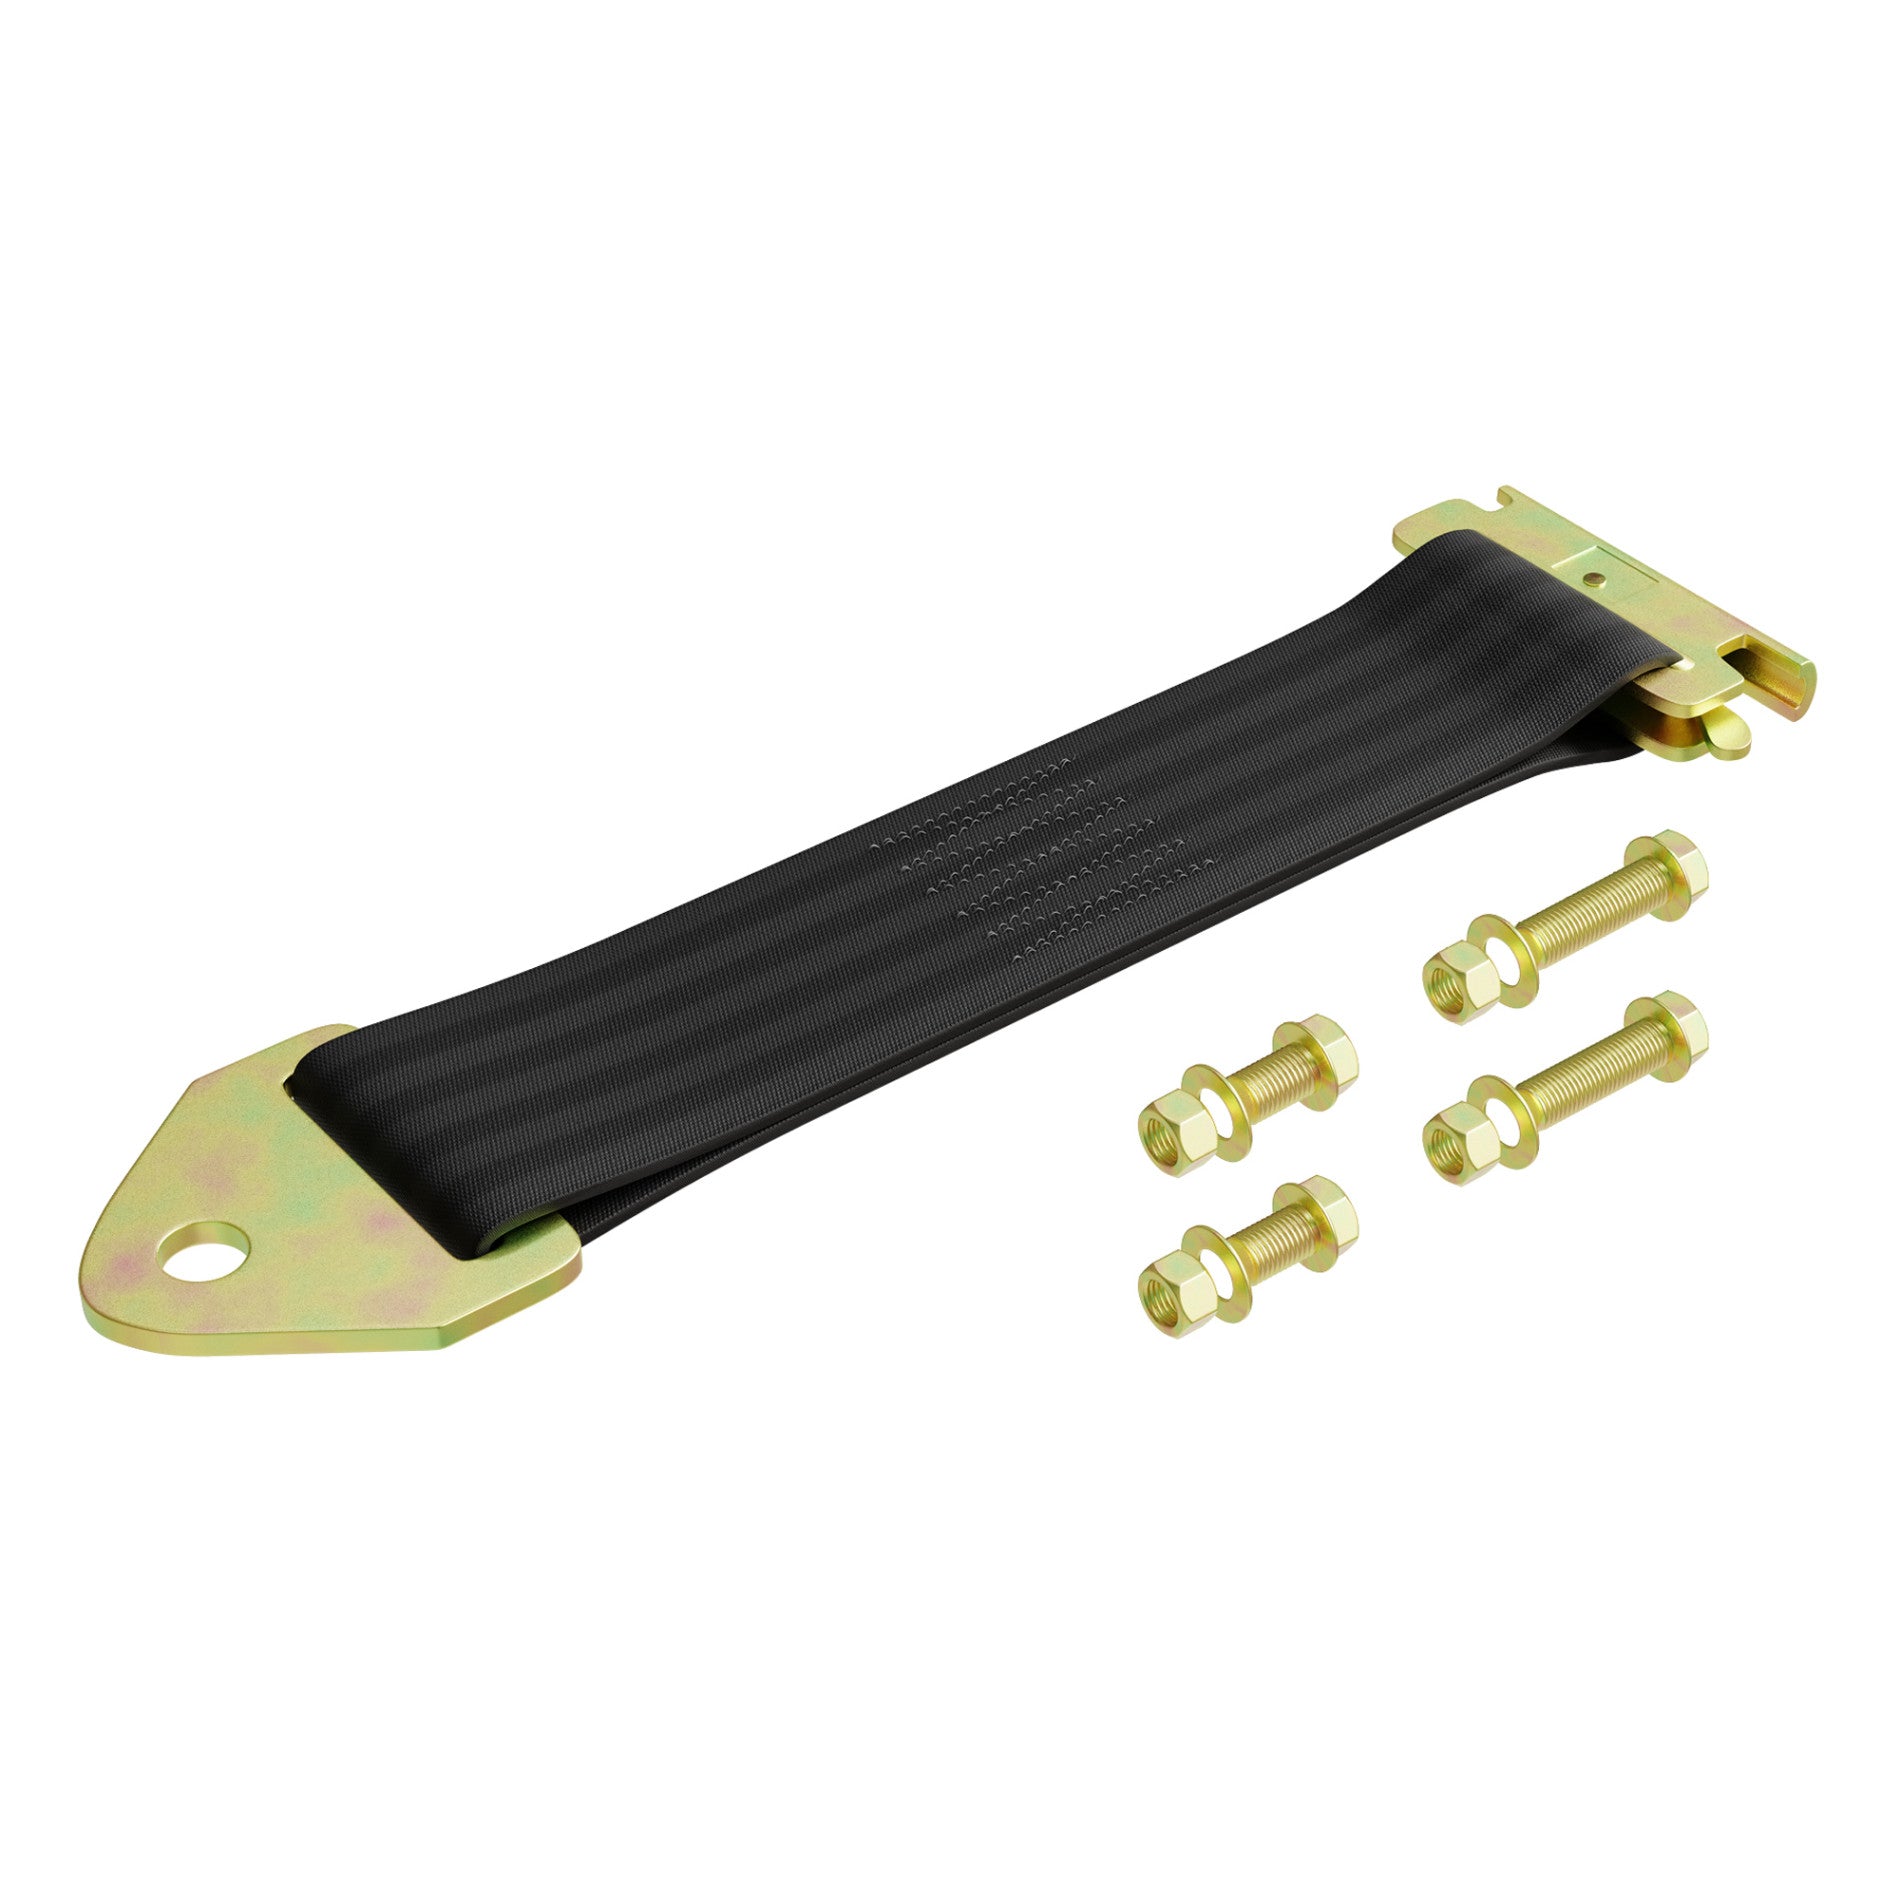 DC Cargo Bolt-On Auto-Retract Ratchet Strap with E-Track Adapter, 2x10',  2-pack at Tractor Supply Co.